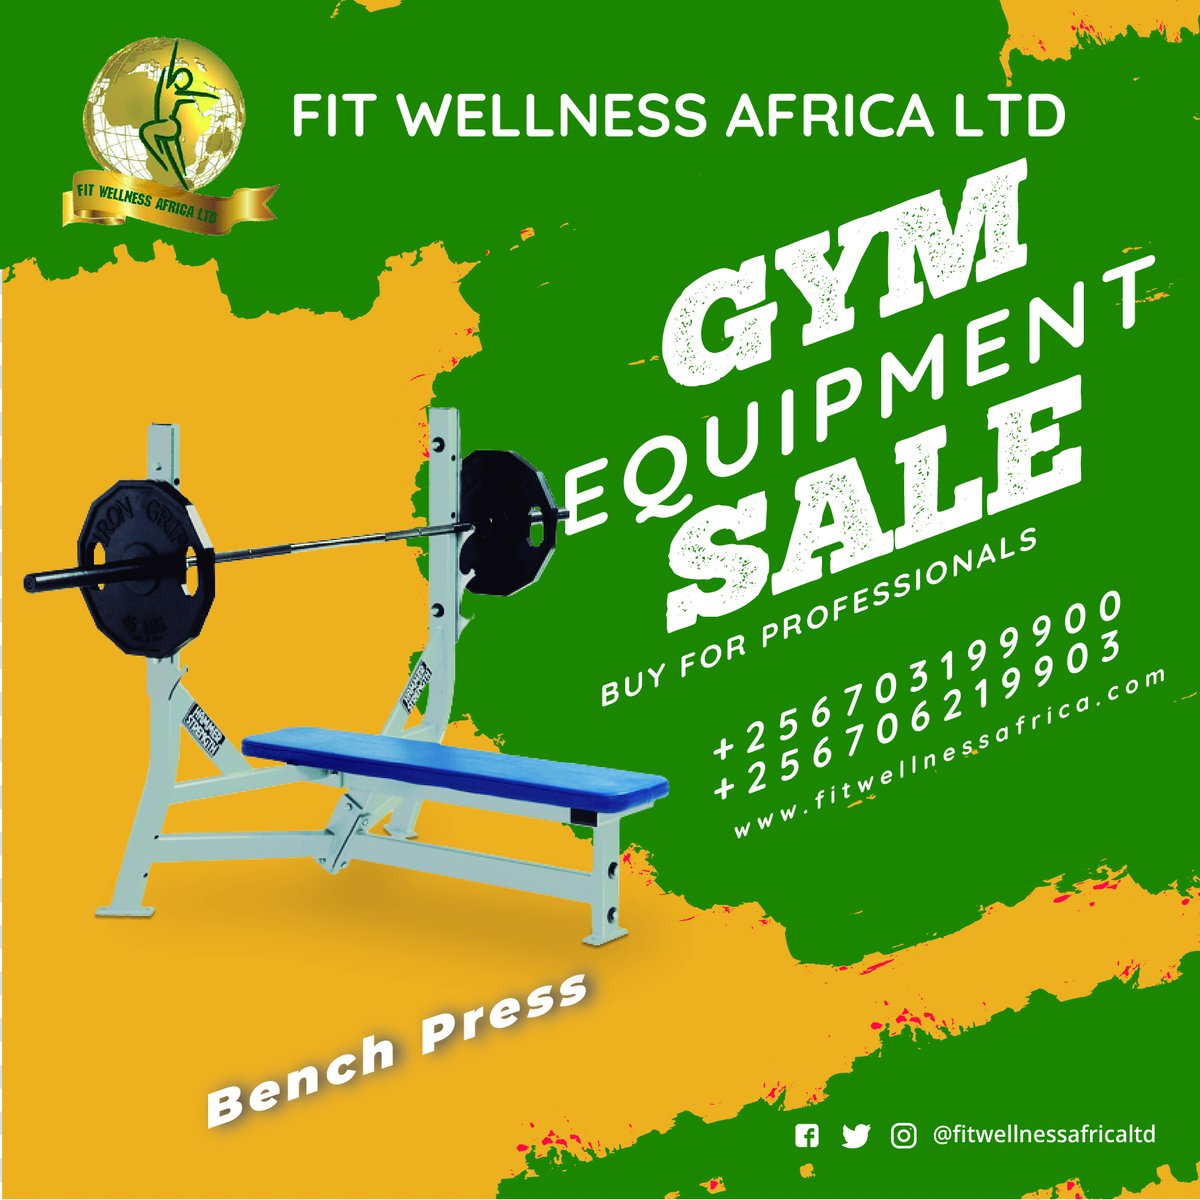 Buy Gym Equipment Setup #personaltrainer #gymequipments #gymtime #gymequipmentsupplier #homegymsetup #strength #india #getfit #functionaltraining #fitnessstudio #gymlifestyle #instafit #treadmill #fitnessmodel #health #gymlover #gymworkout #gymaddict #sportswear #workoutequipment